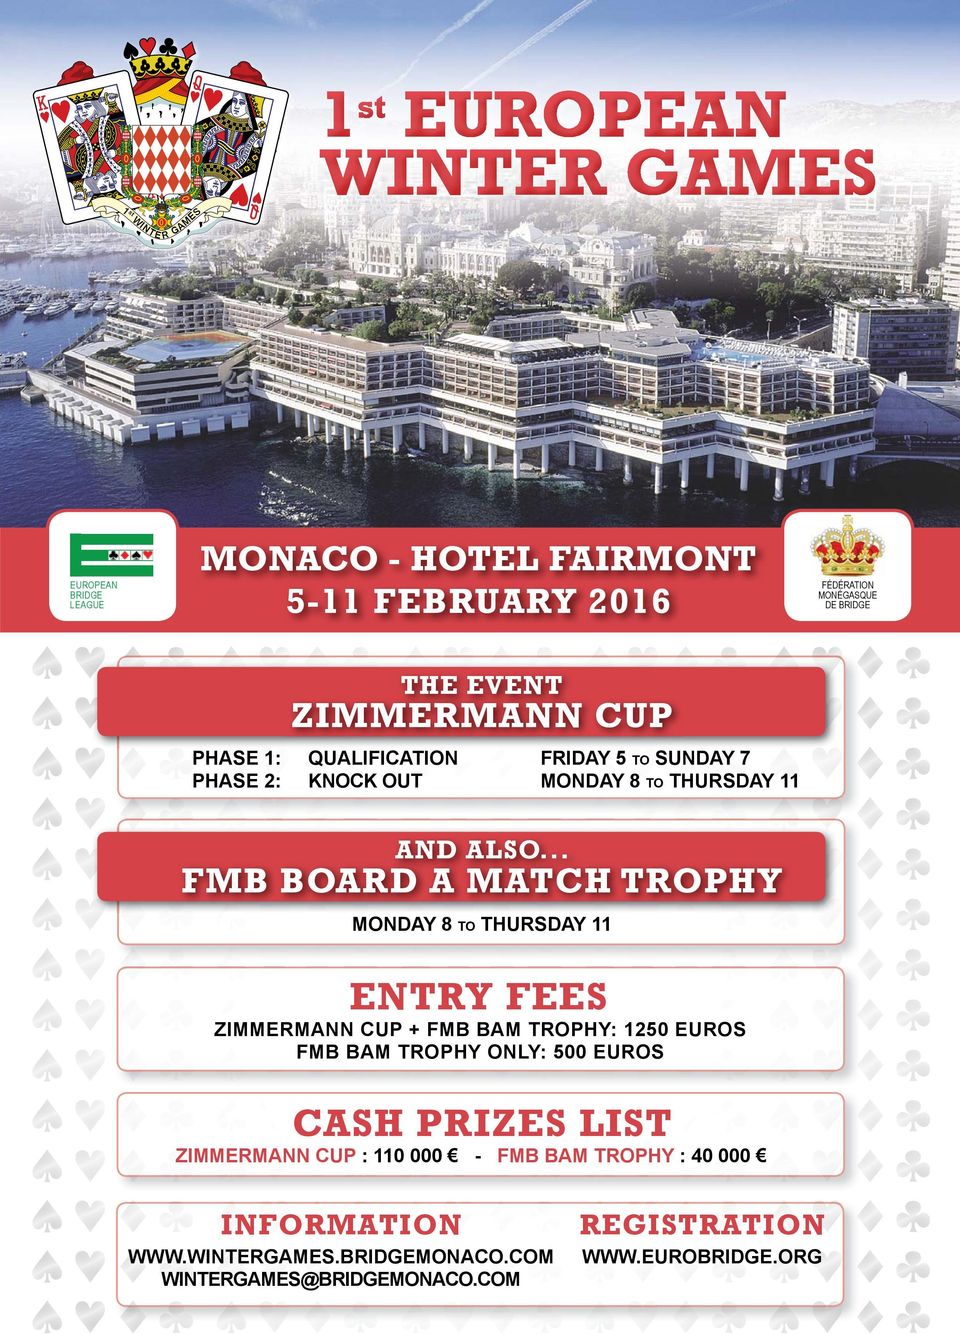 .. FMB BOARD D A MATCH MATC TROPHY MONDAY 8 TO THURSDAY 11 ENTRY FEES ZIMMERMANN CUP + FMB BAM TROPHY: 1250 EUROS FMB BAM TROPHY ONLY: 500